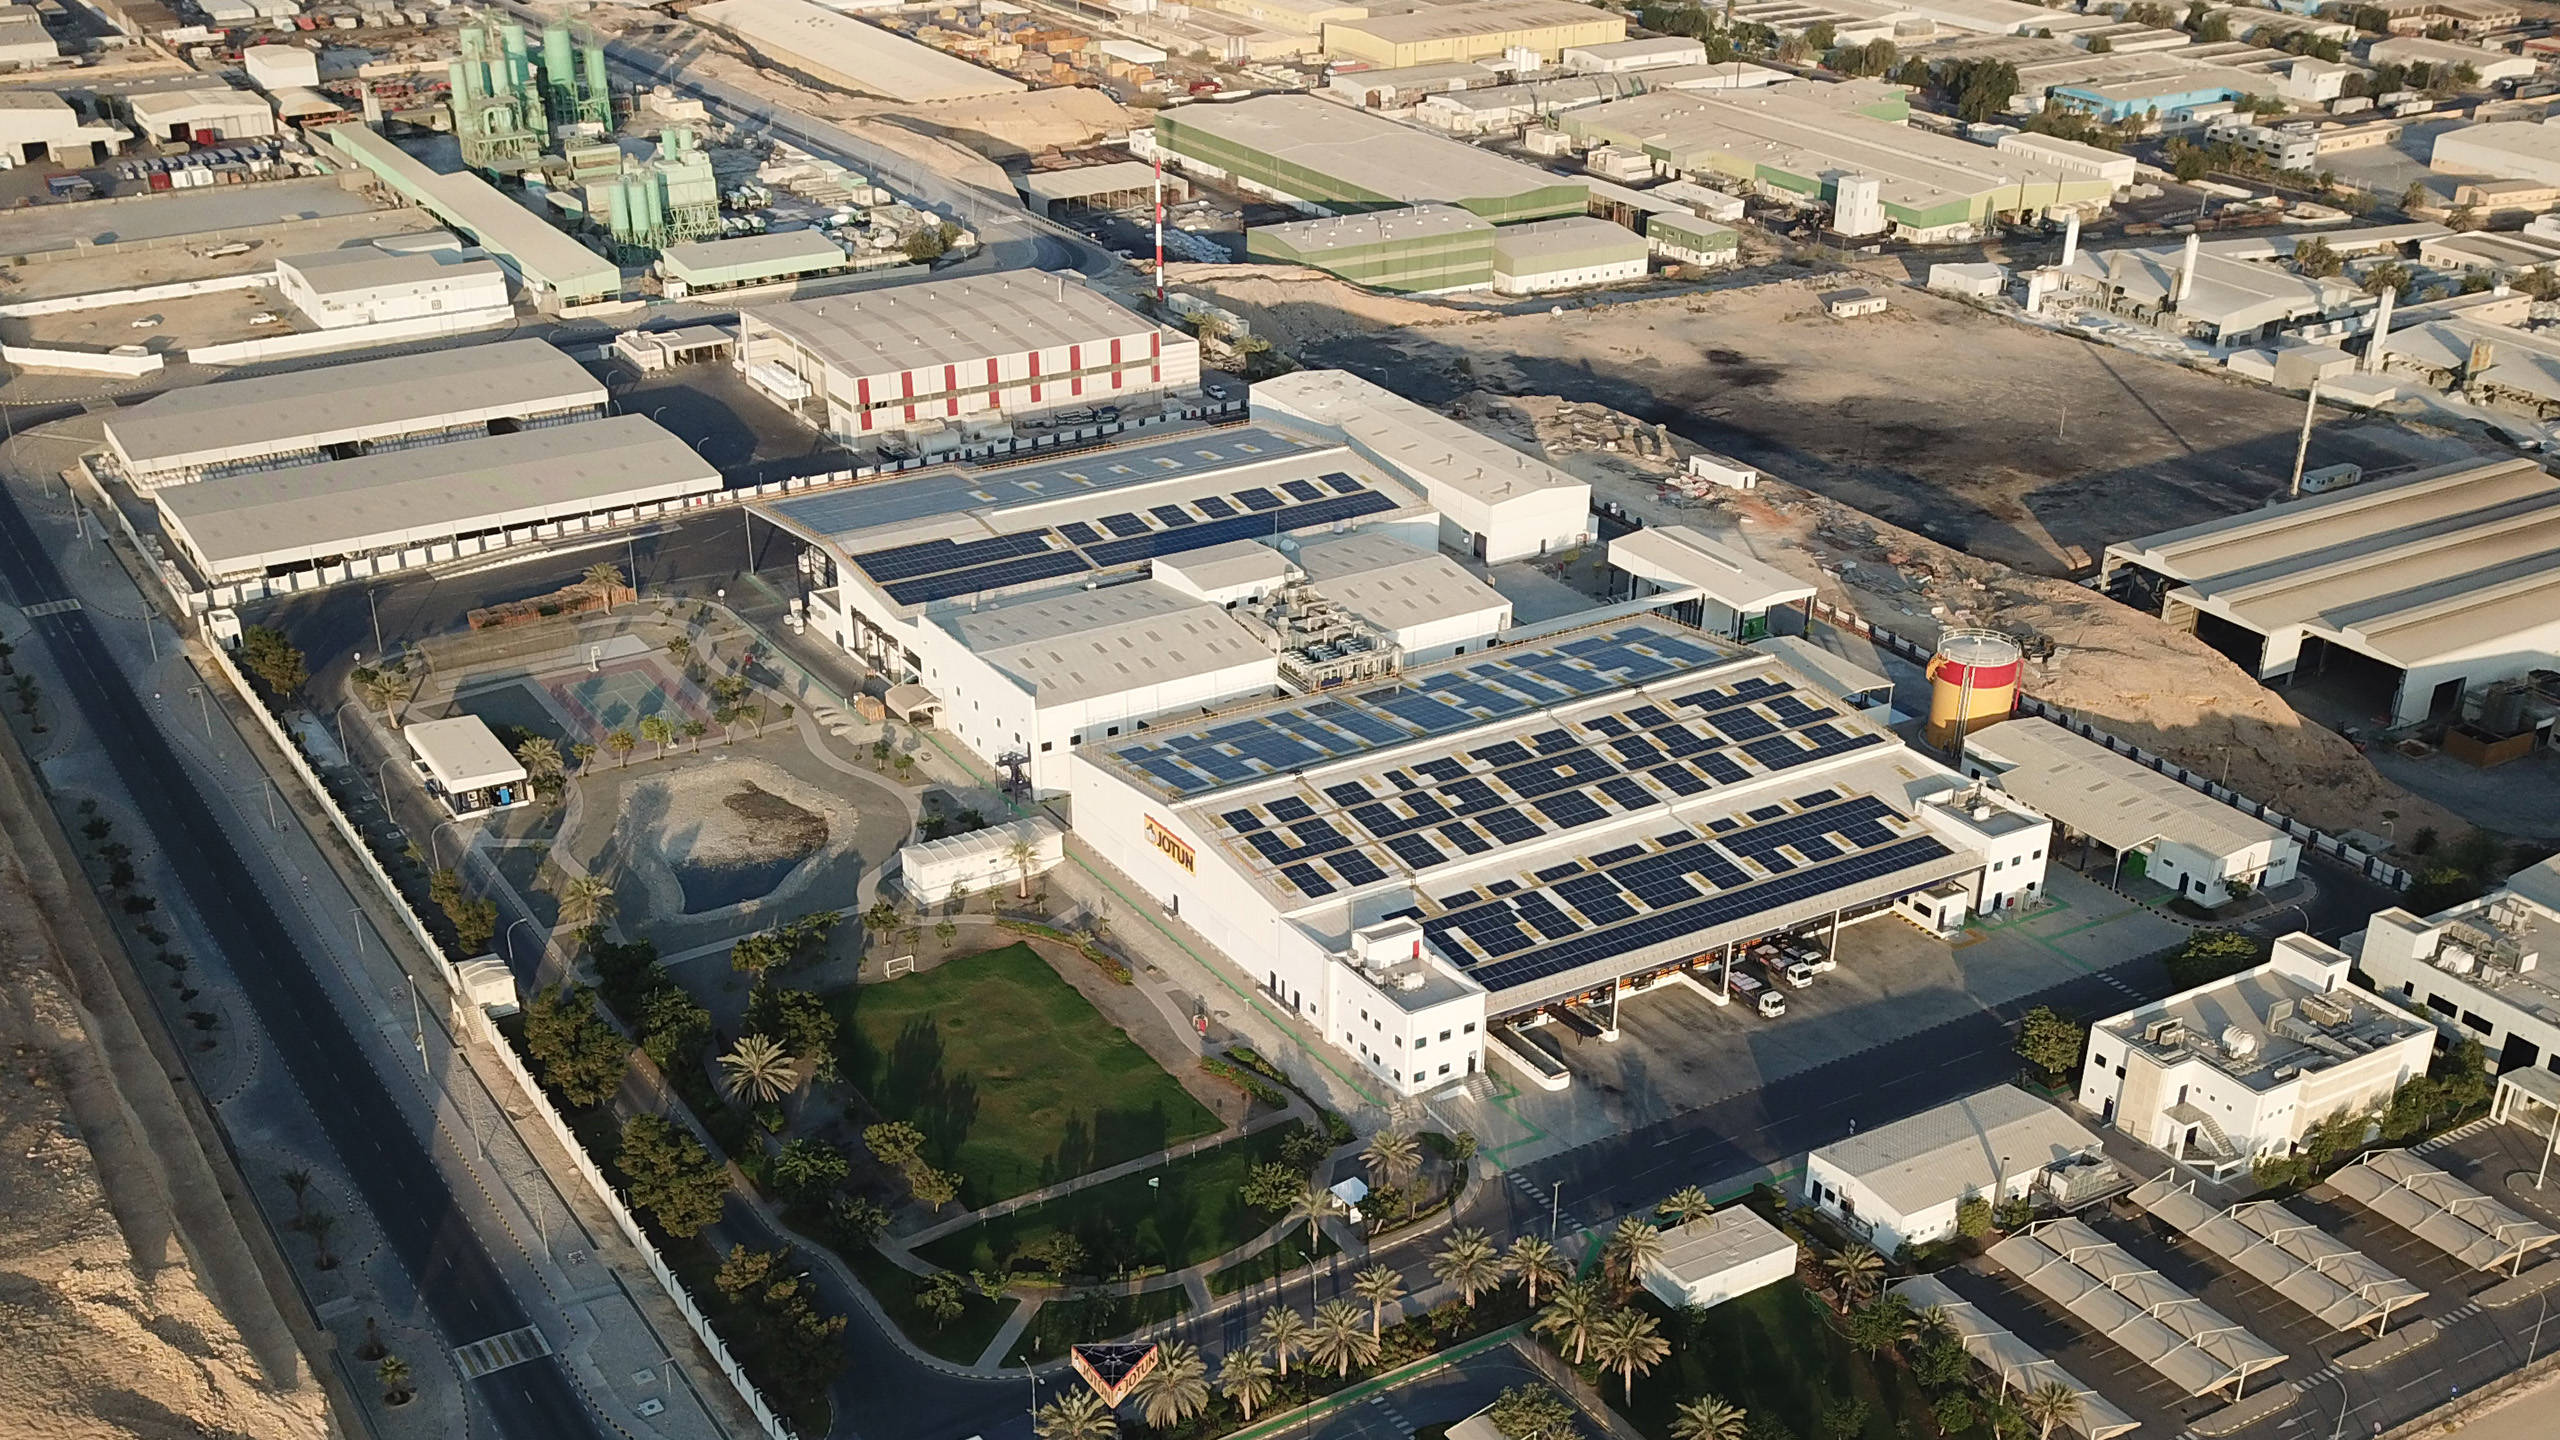 Drone photo of the solar panels on Jotun's factory in Oman